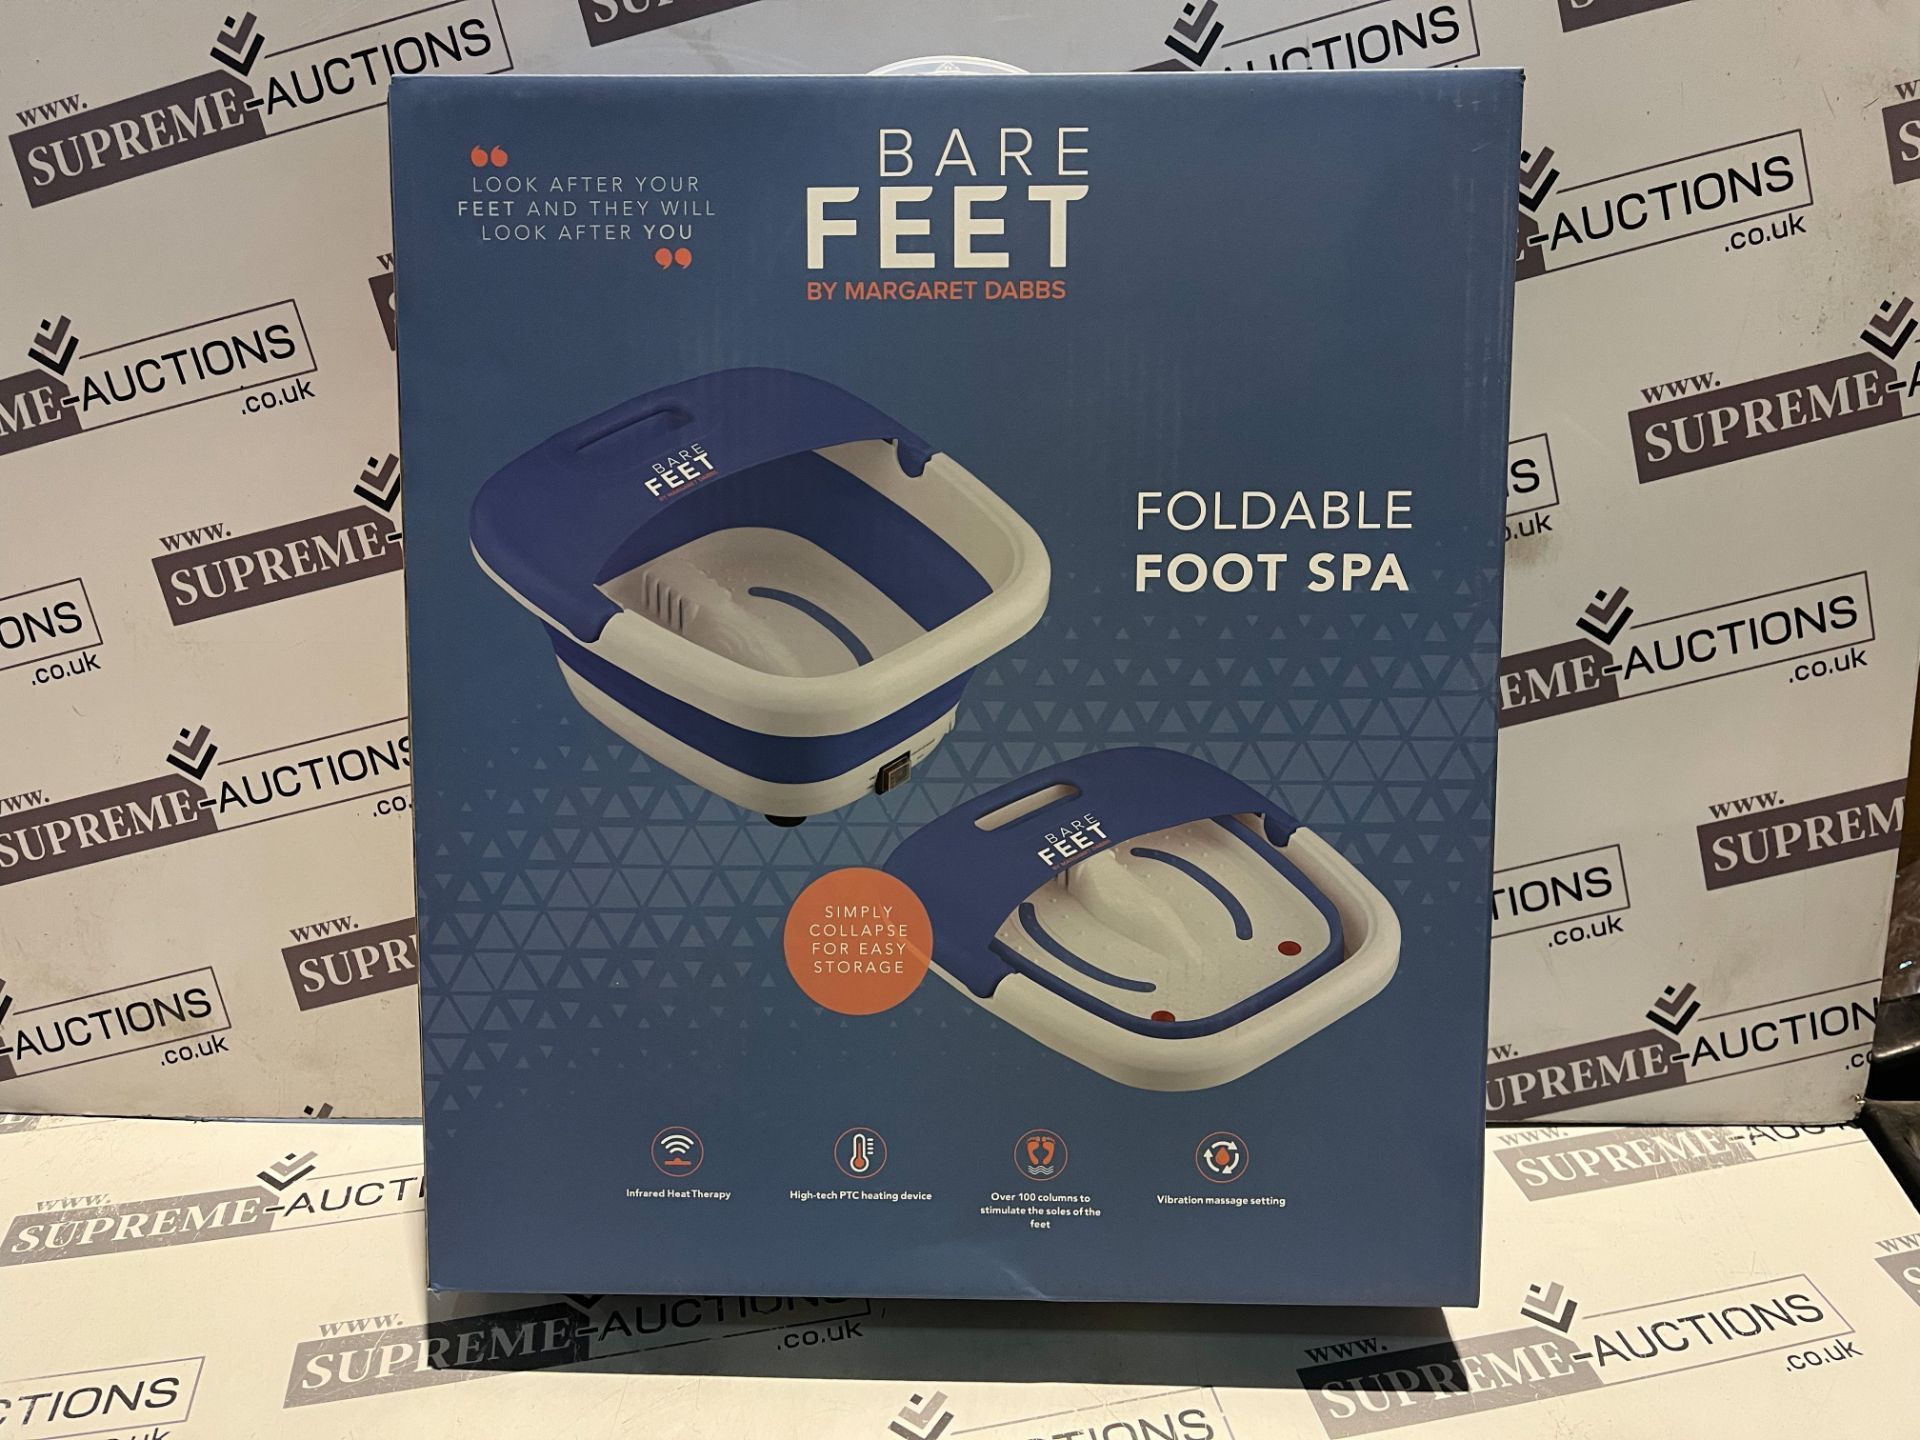 3 X BRAND NEW BARE FEET Foldable Foot Spa R18, Transport yourself away to the spa in the comfort